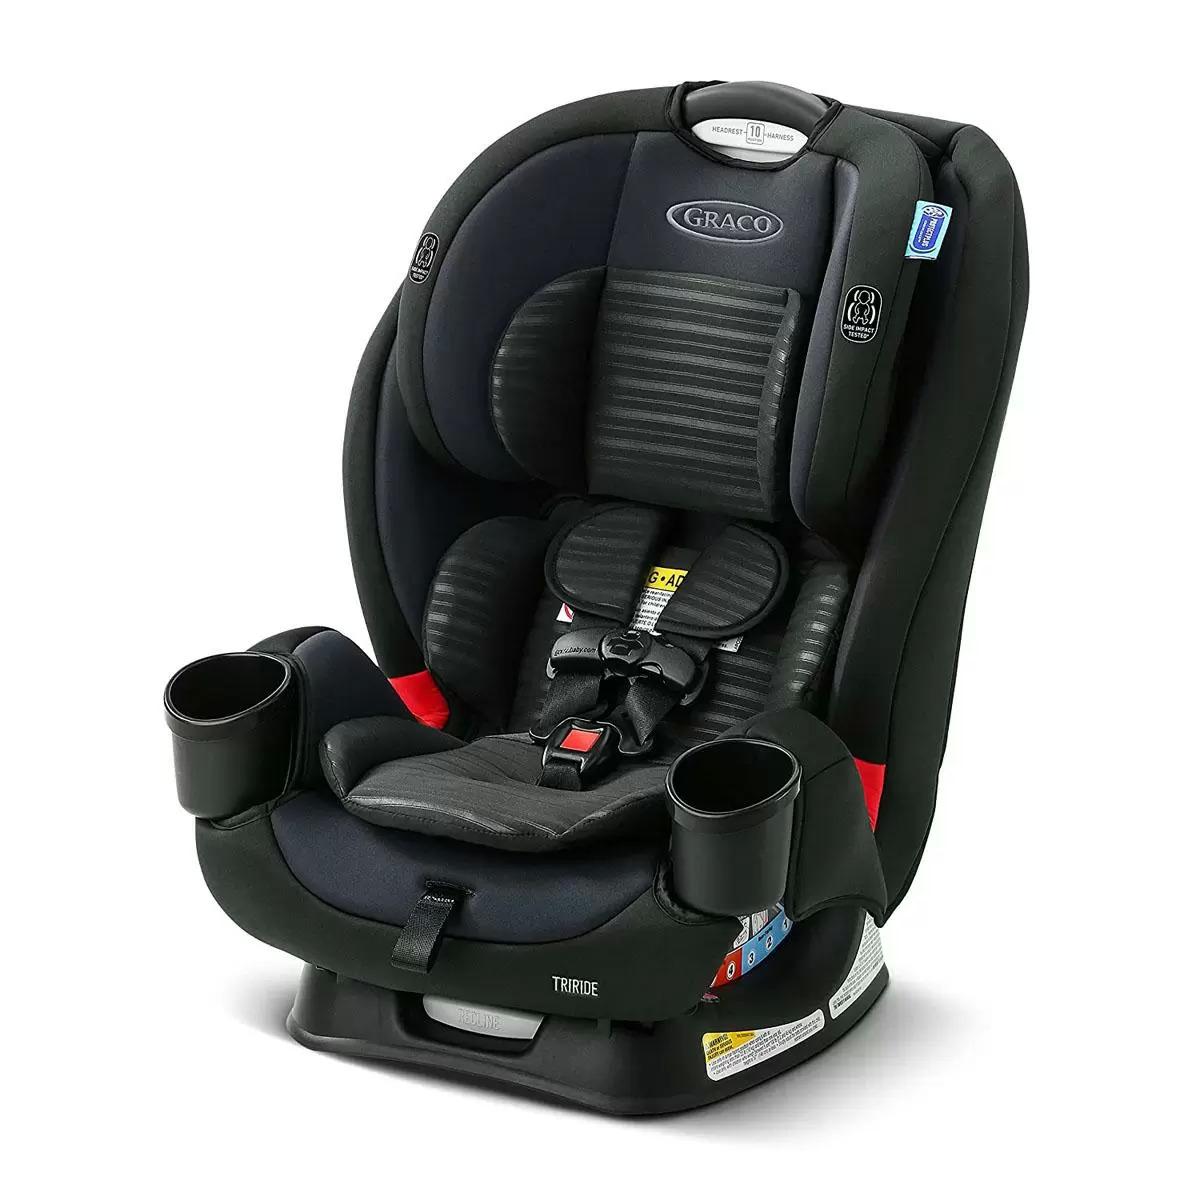 Graco TriRide 3-in-1 Convertible Car Seat for $113.99 Shipped